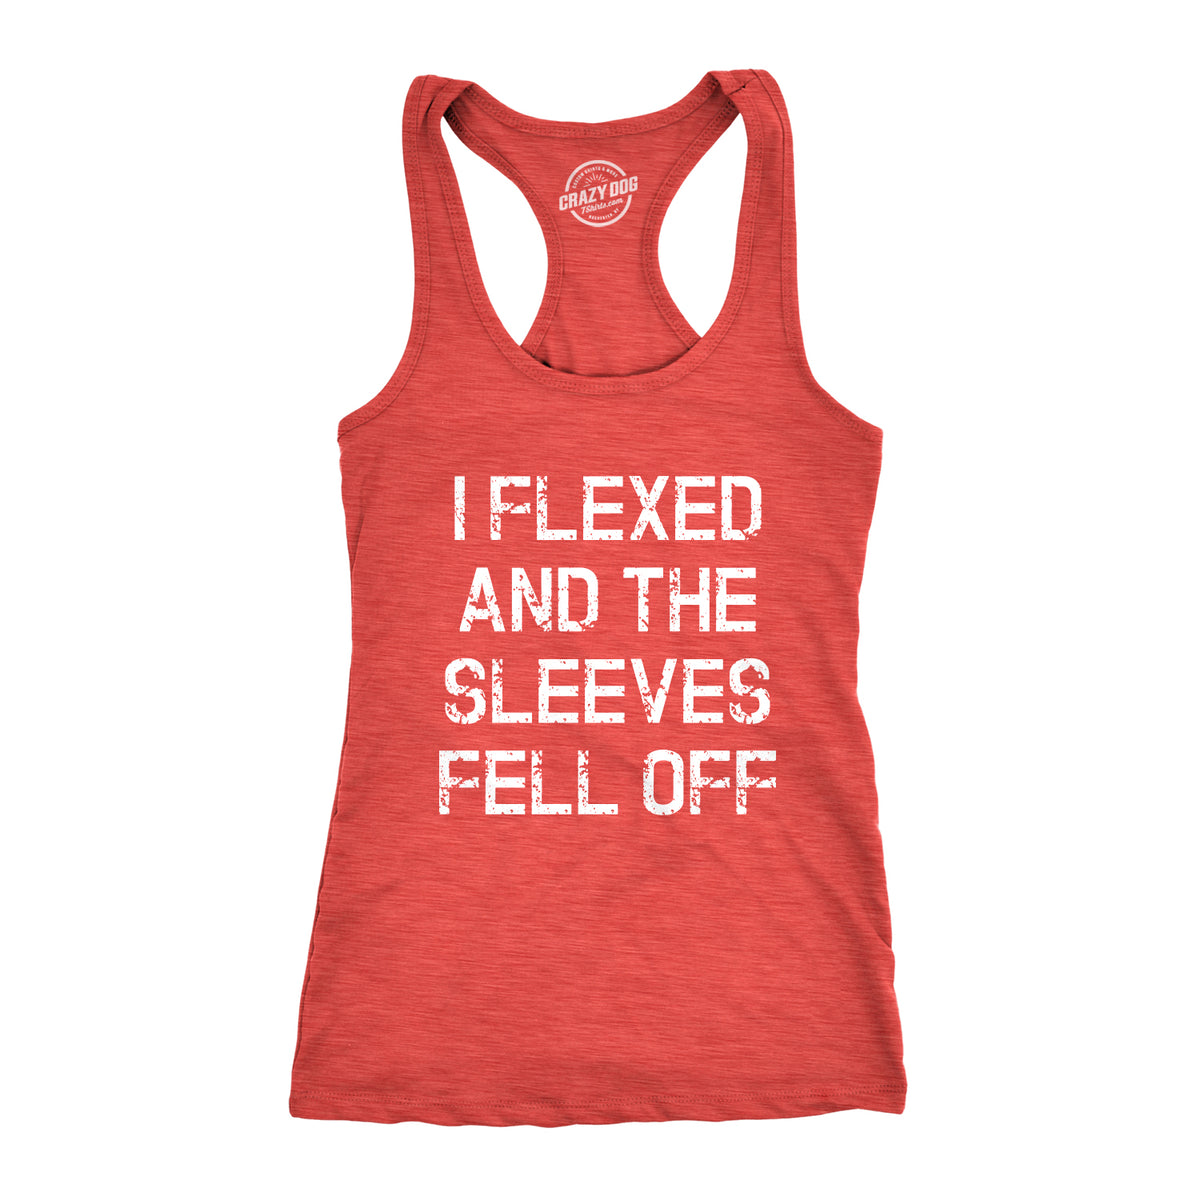 Funny Red I Flexed And The Sleeves Fell Off Womens Tank Top Nerdy Fitness Tee